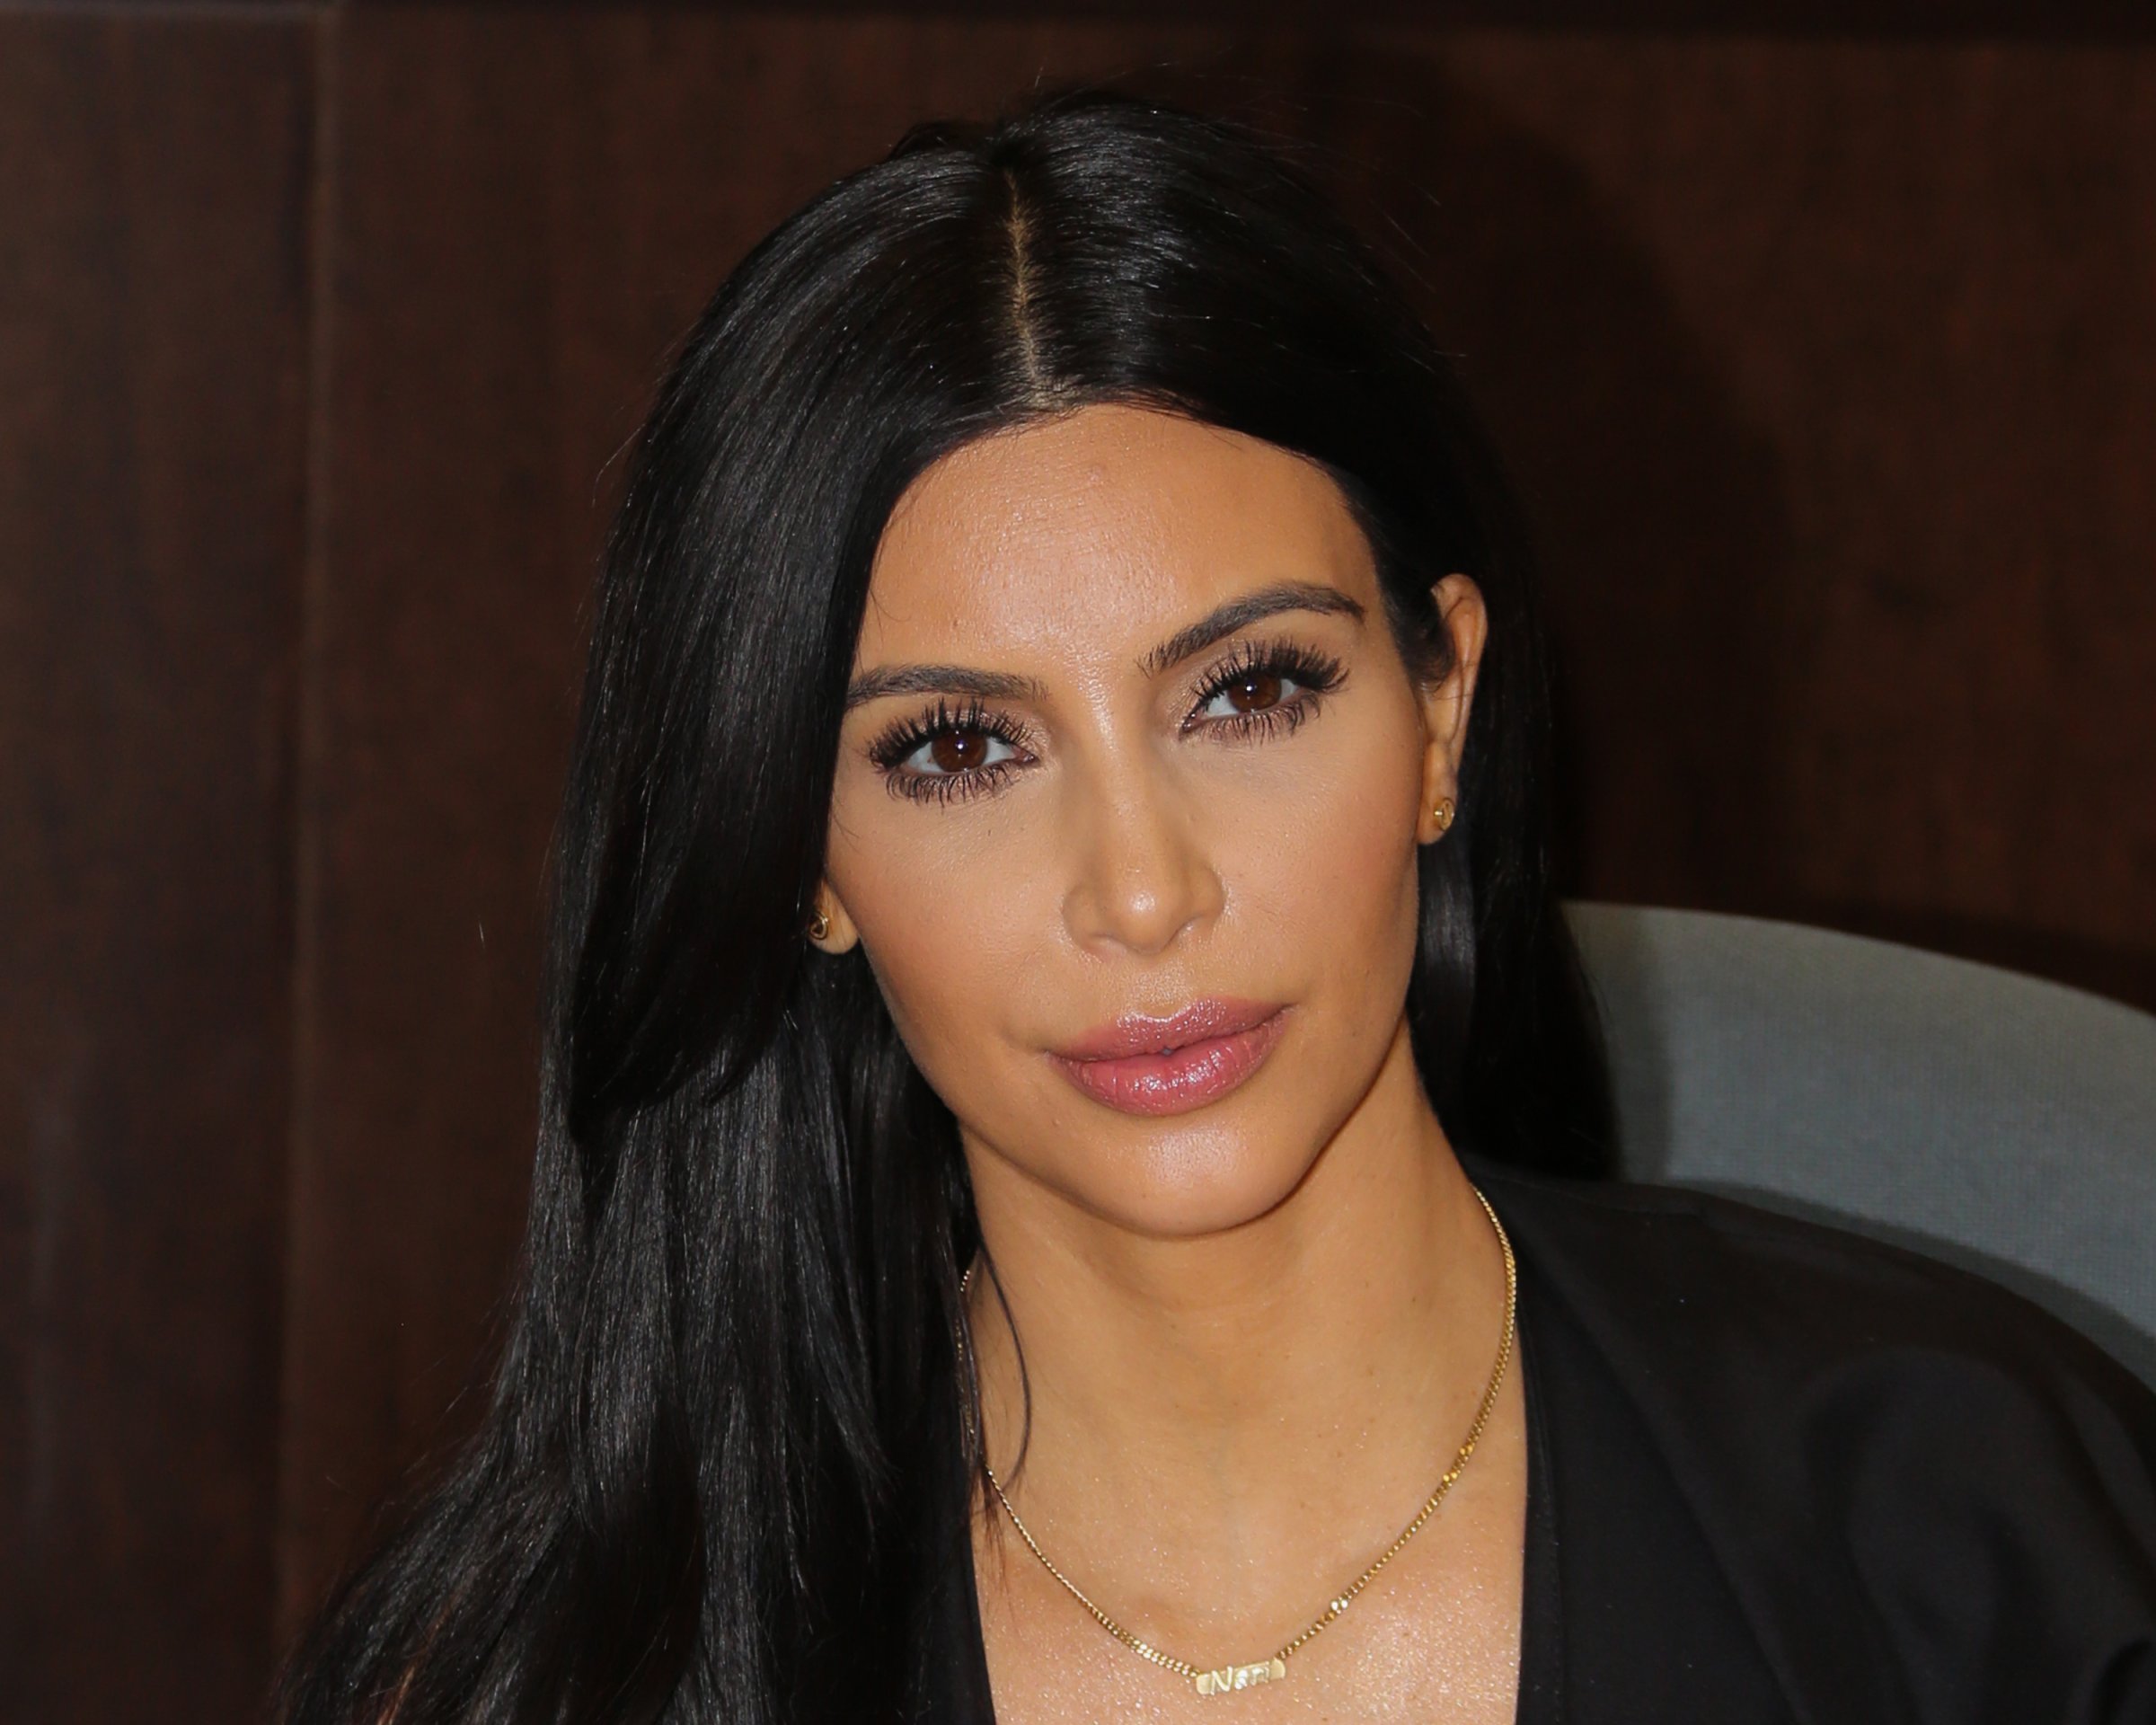 Reality TV Personality Kim Kardashian signs copies of her new book "Selfish" at Barnes & Noble bookstore at The Grove on May 7, 2015 in Los Angeles.